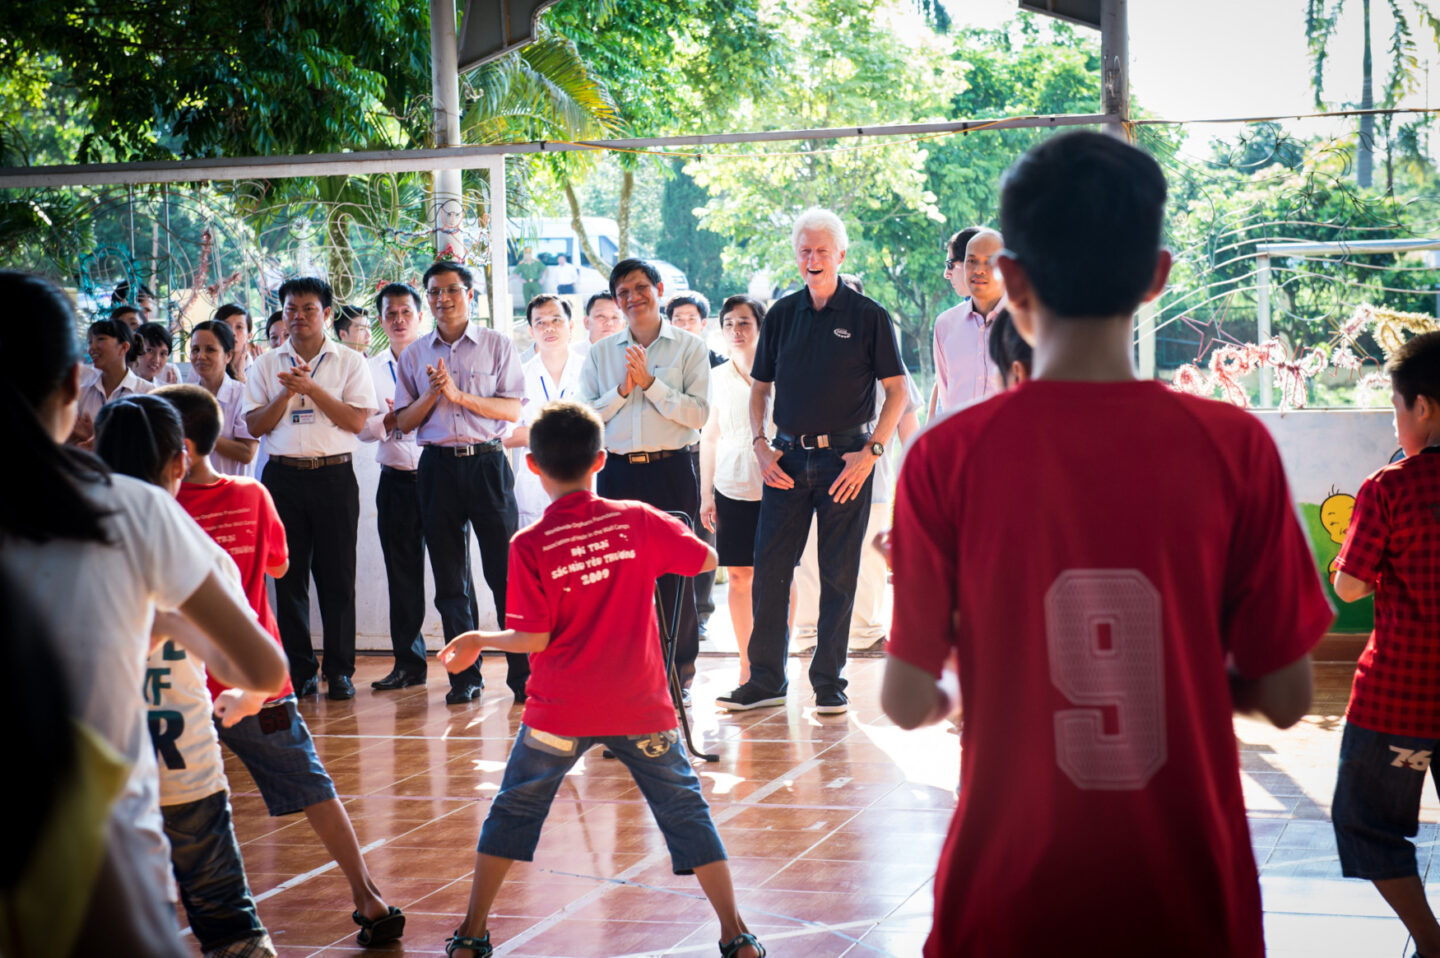 President Clinton and a group of individuals gather at an orphanage in Hanoi, Vietnam